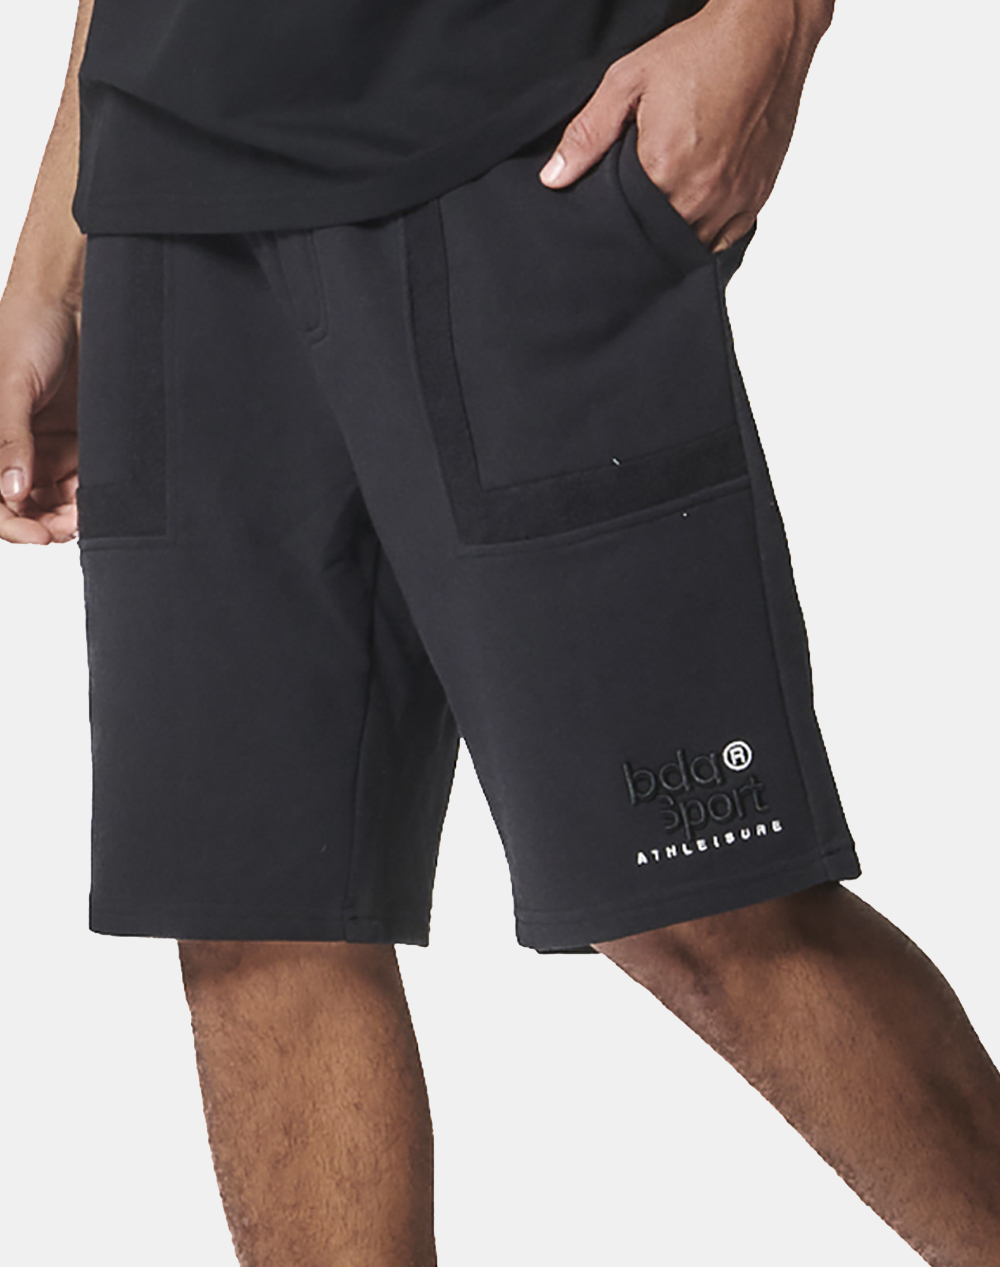 BODY ACTION MEN''S ATHLETIC SHORTS W/EMBROIDERY